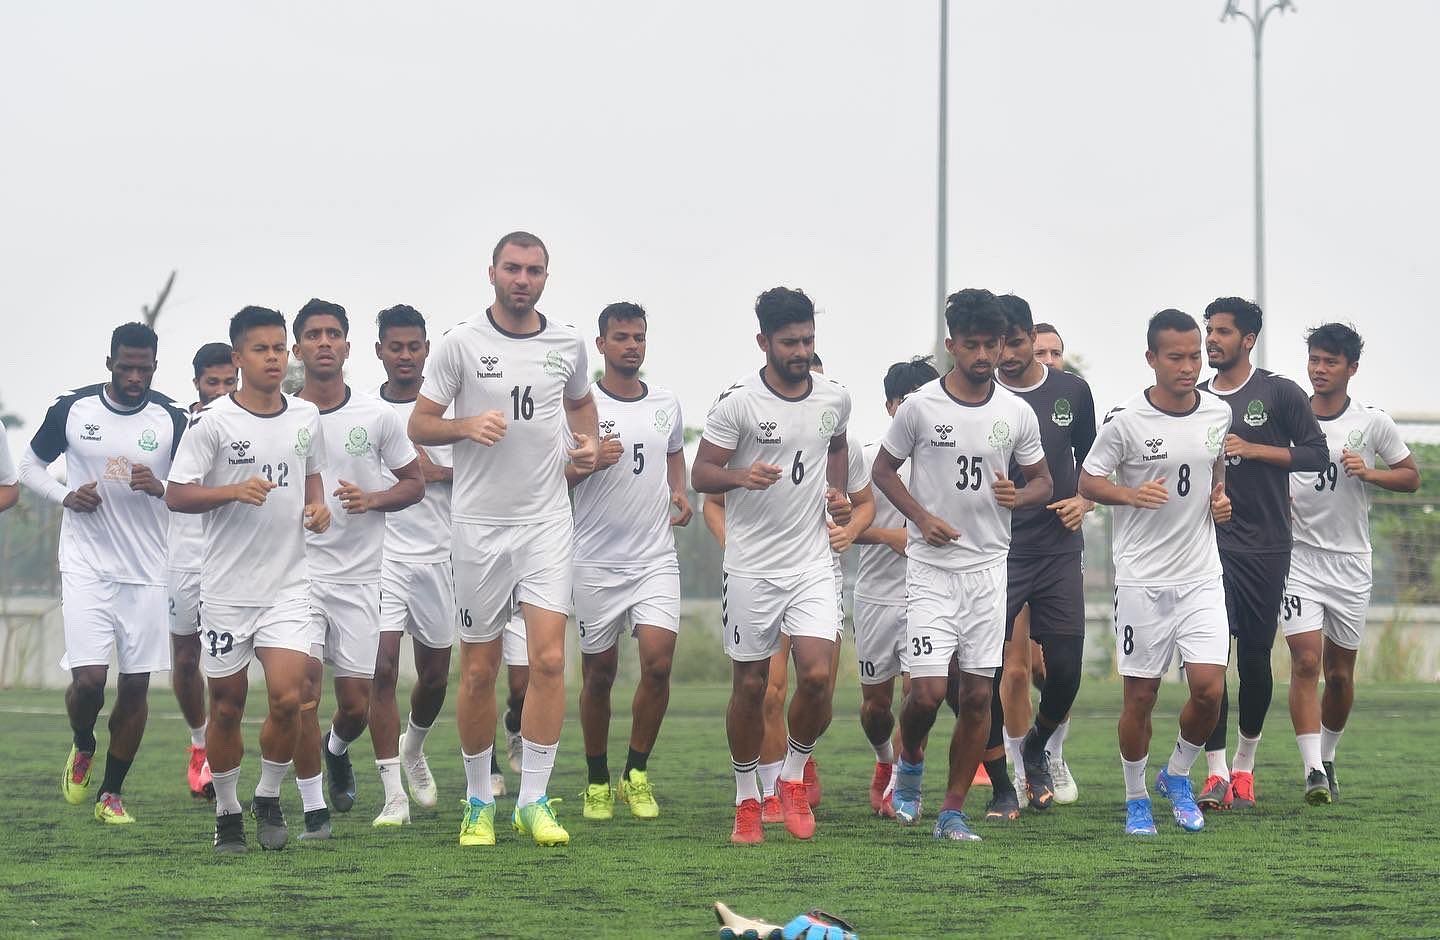 Mohammedan SC players training ahead of their clash against NEROCA FC. (Image Courtesy: Twitter/MohammedanSC)